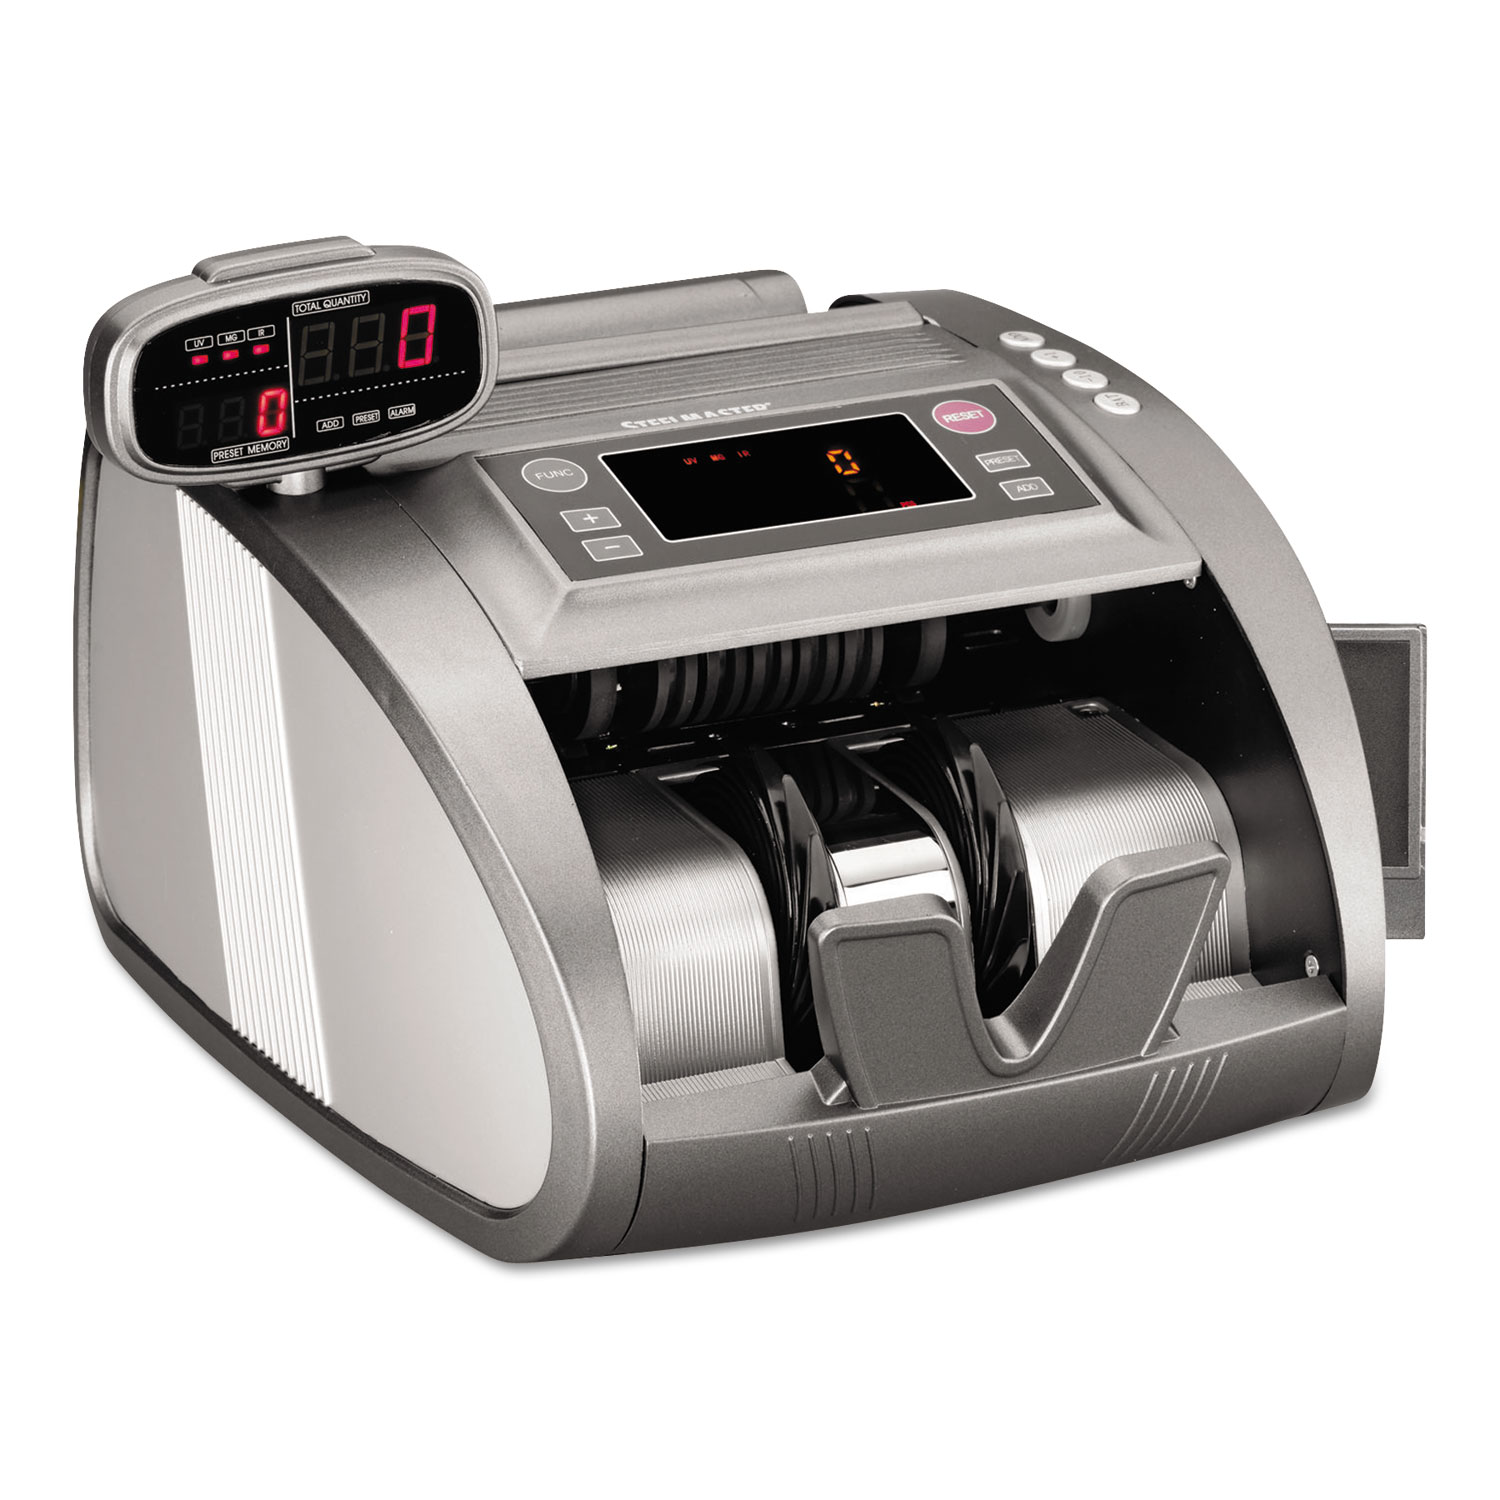  SteelMaster 2004820C8 4820 Bill Counter with Counterfeit Detection, 1200 Bills/Min, Charcoal Gray (MMF2004820C8) 